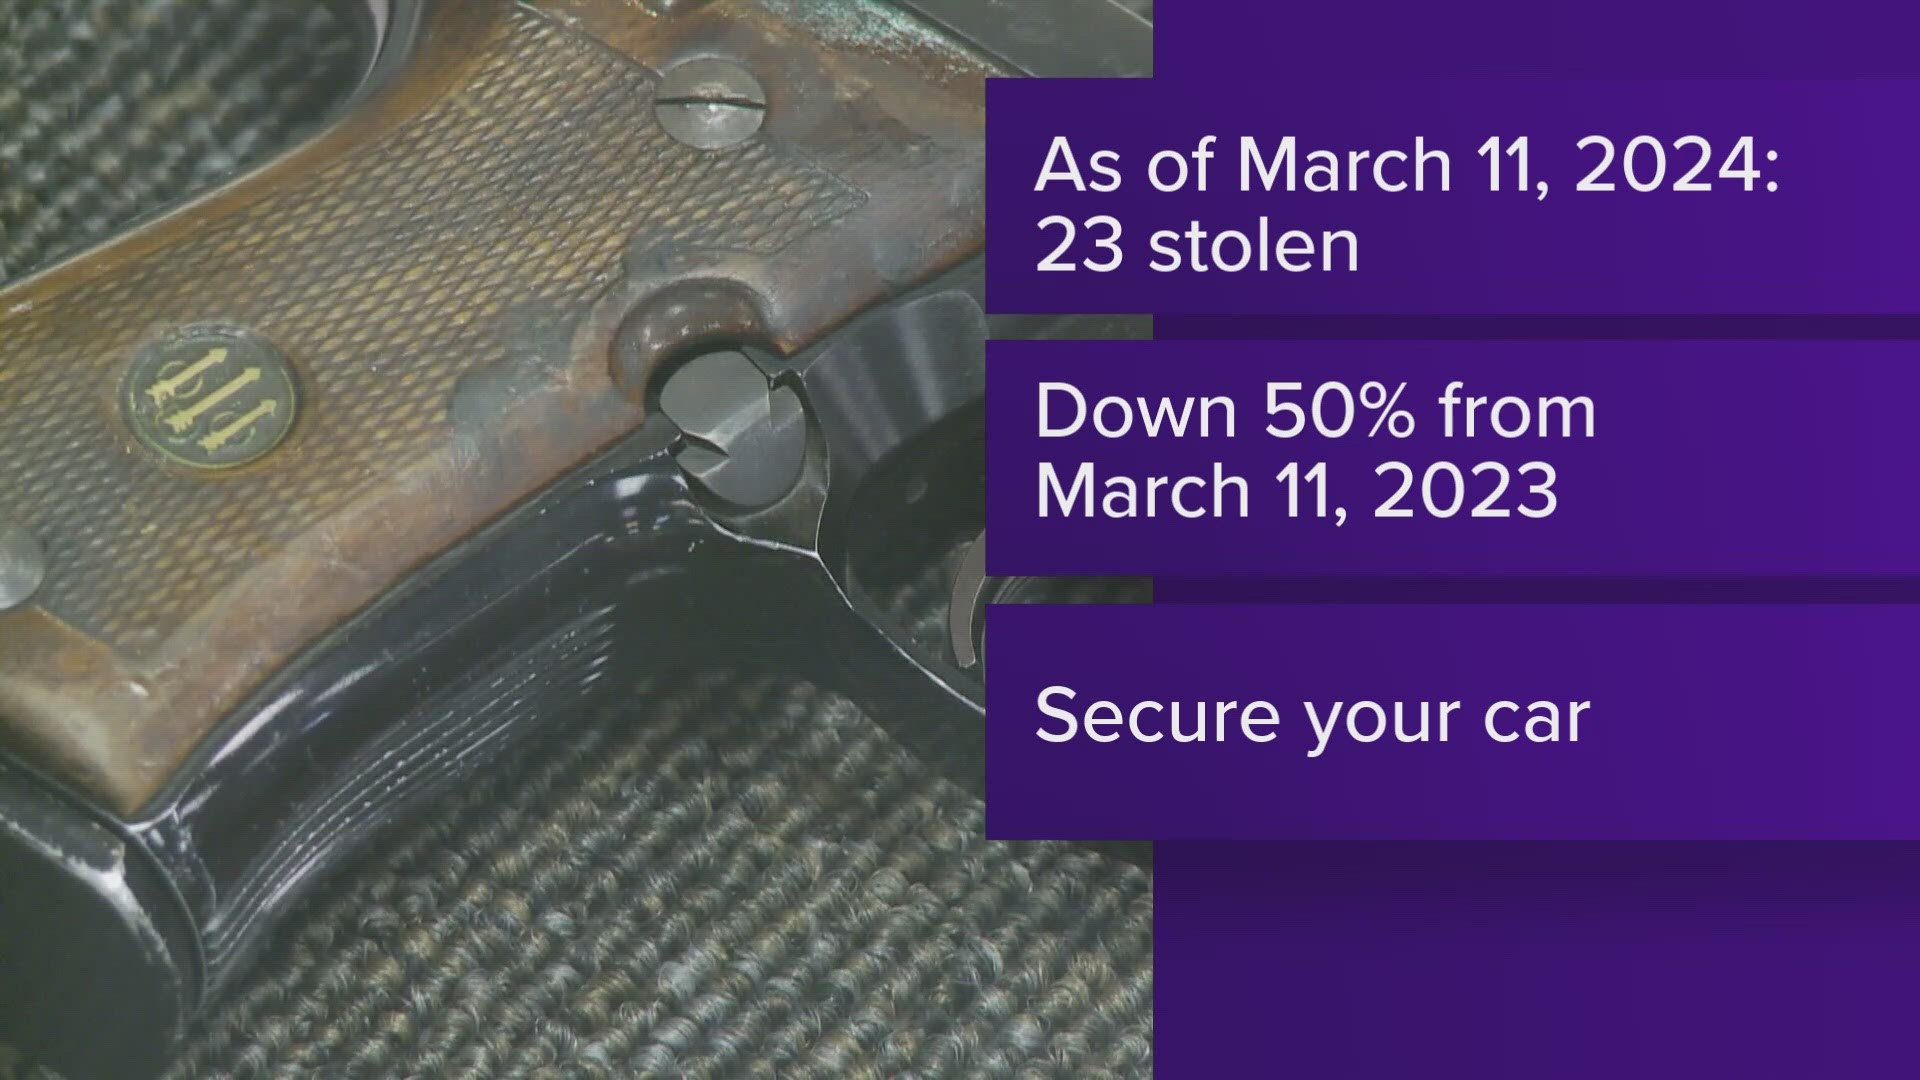 The Knoxville Police Department said 23 guns were stolen from cars in the area this year, as of March 11.